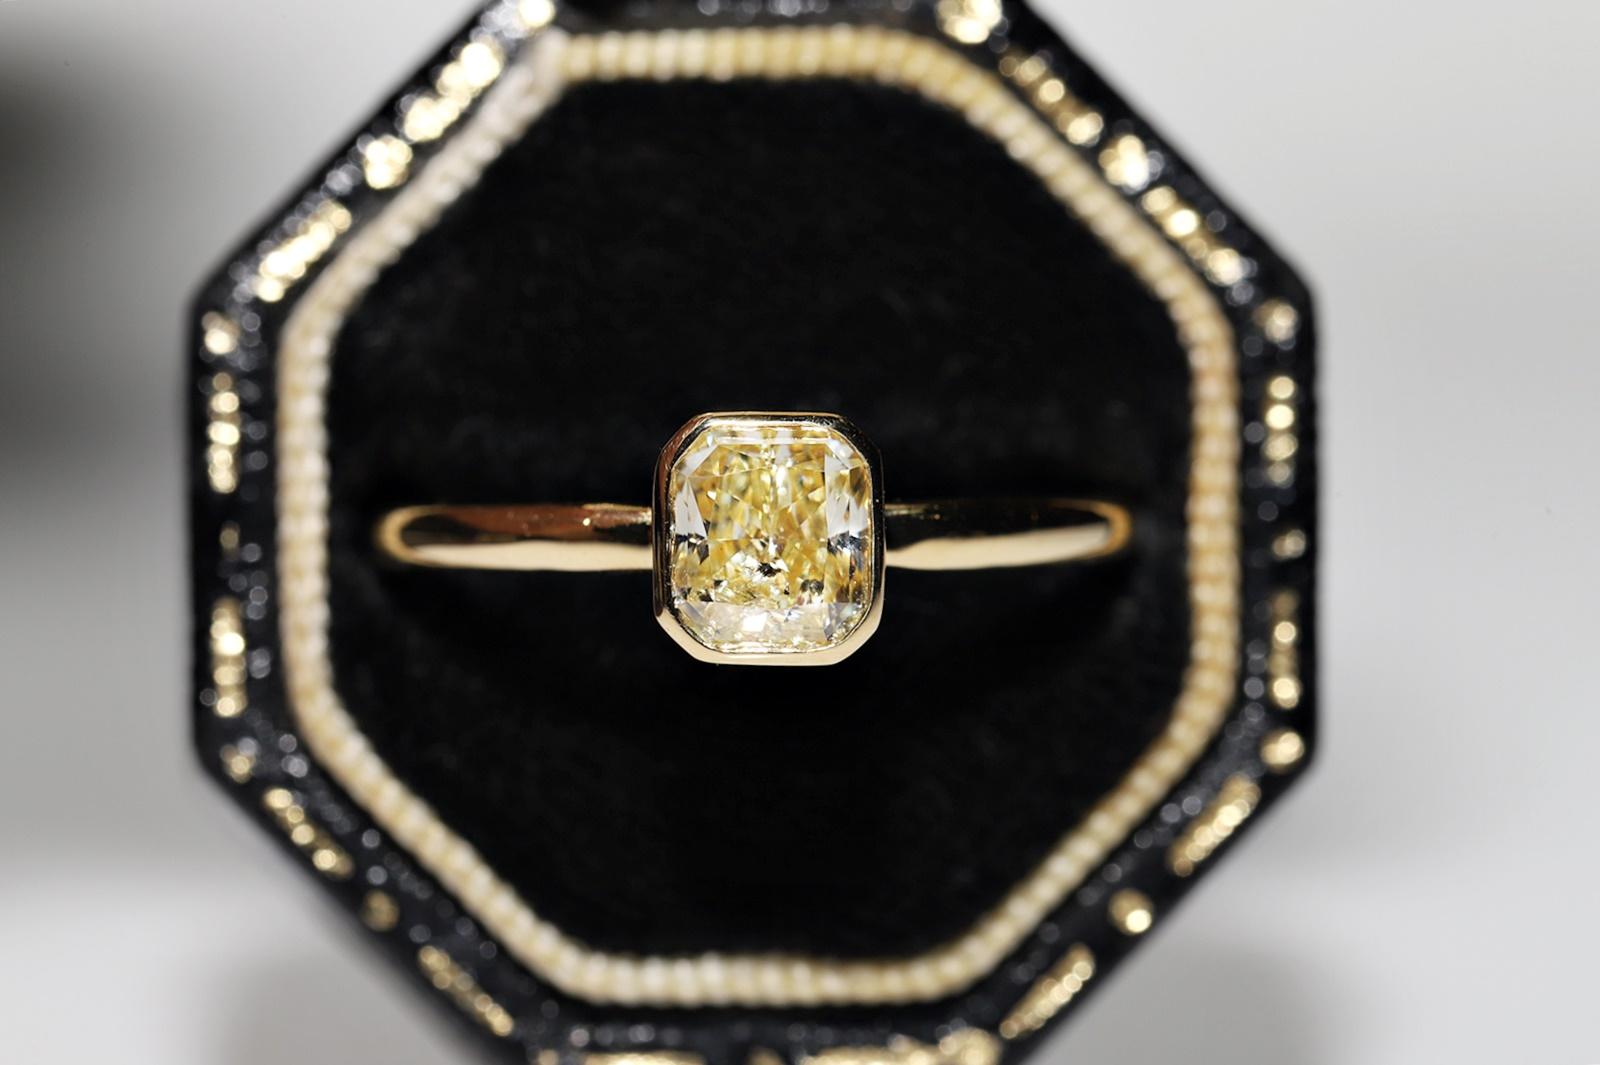 In very good condition.
Total weight is 2.7 grams.
Totally is diamond 1.05 ct.
The diamond is has Fancy color and s2 clarity.
Ring size is US 6.8 (We offer free resizing)
We can make any size.
Box is not included.
Please contact for any questions.
